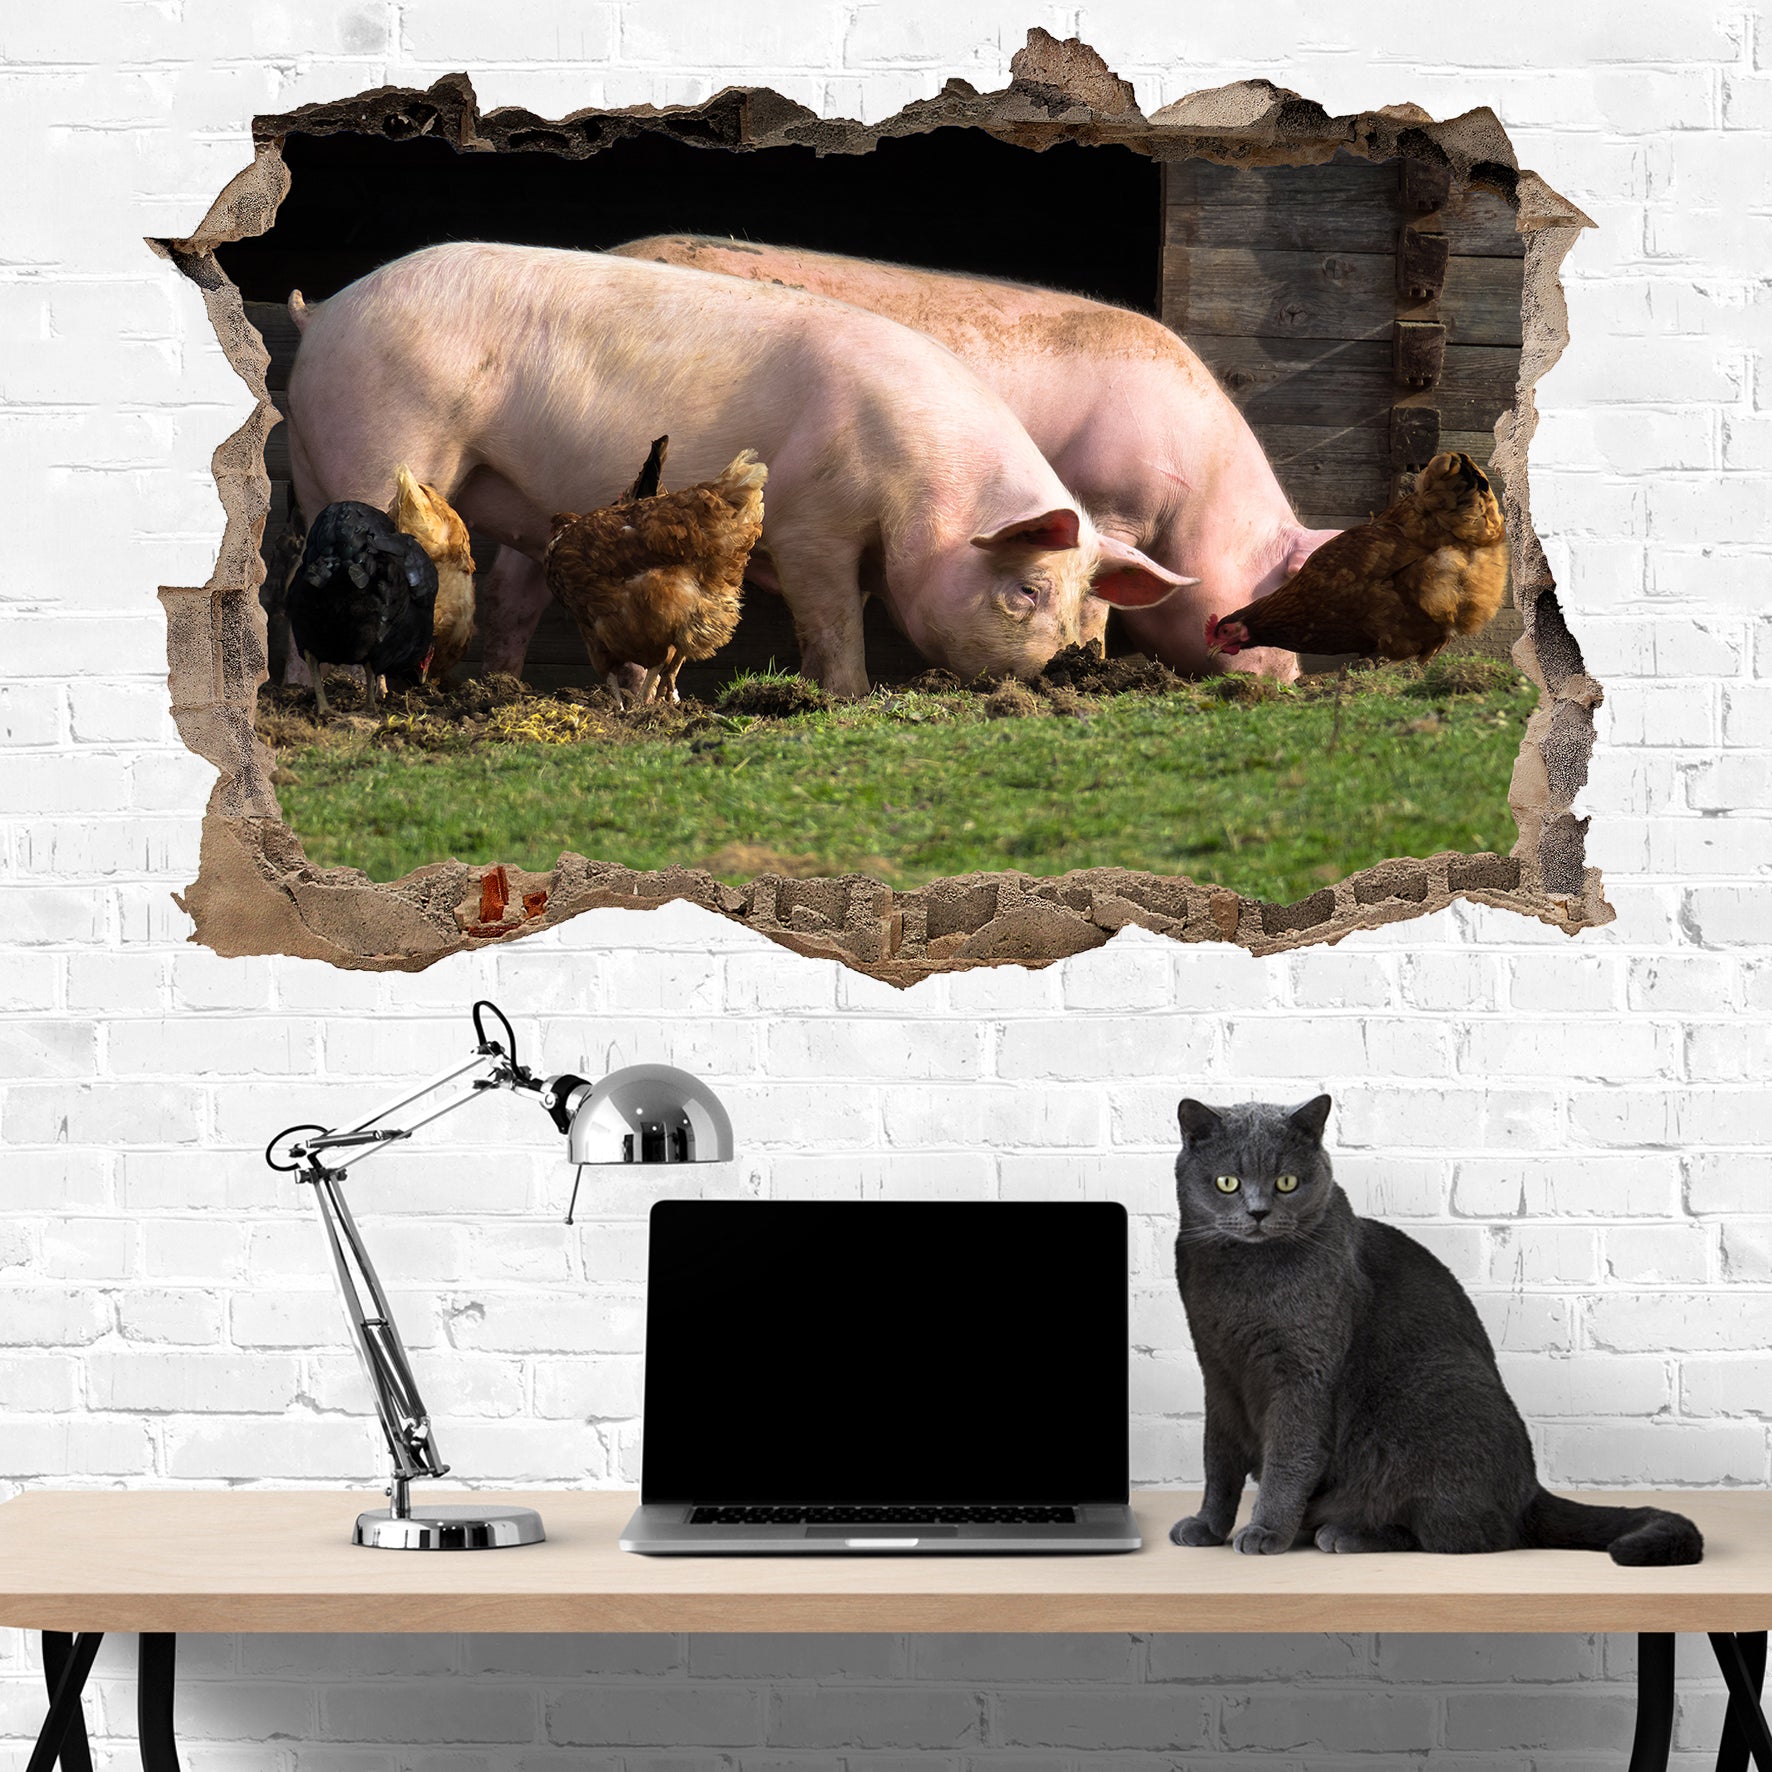 Chickens Pigs Wall Sticker Decal Mural